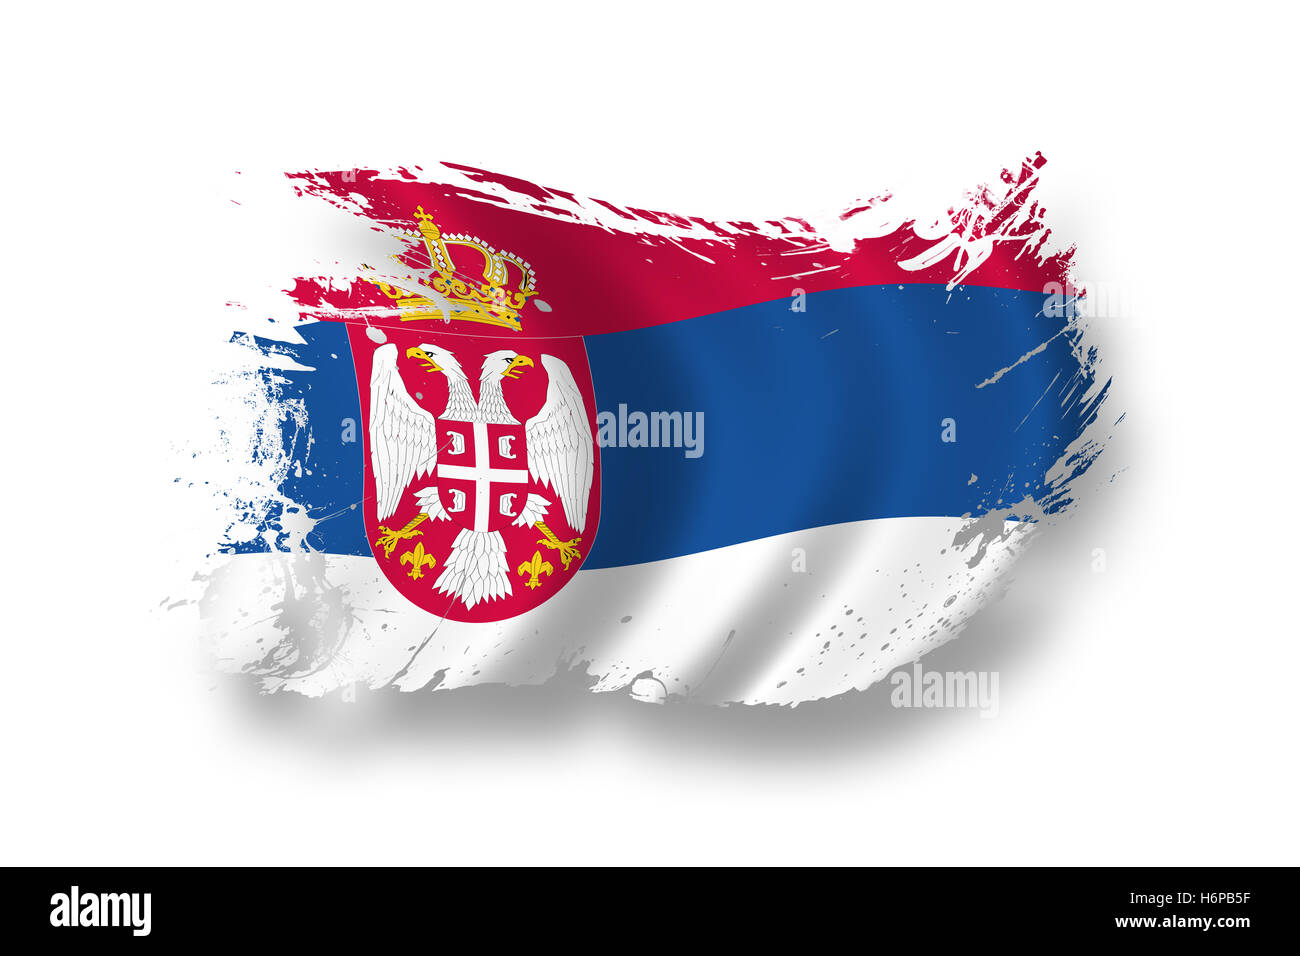 flag national serbia flag blow national pictogram symbol pictograph trade symbol wind serbia texture serbia nationalflagge Stock Photo